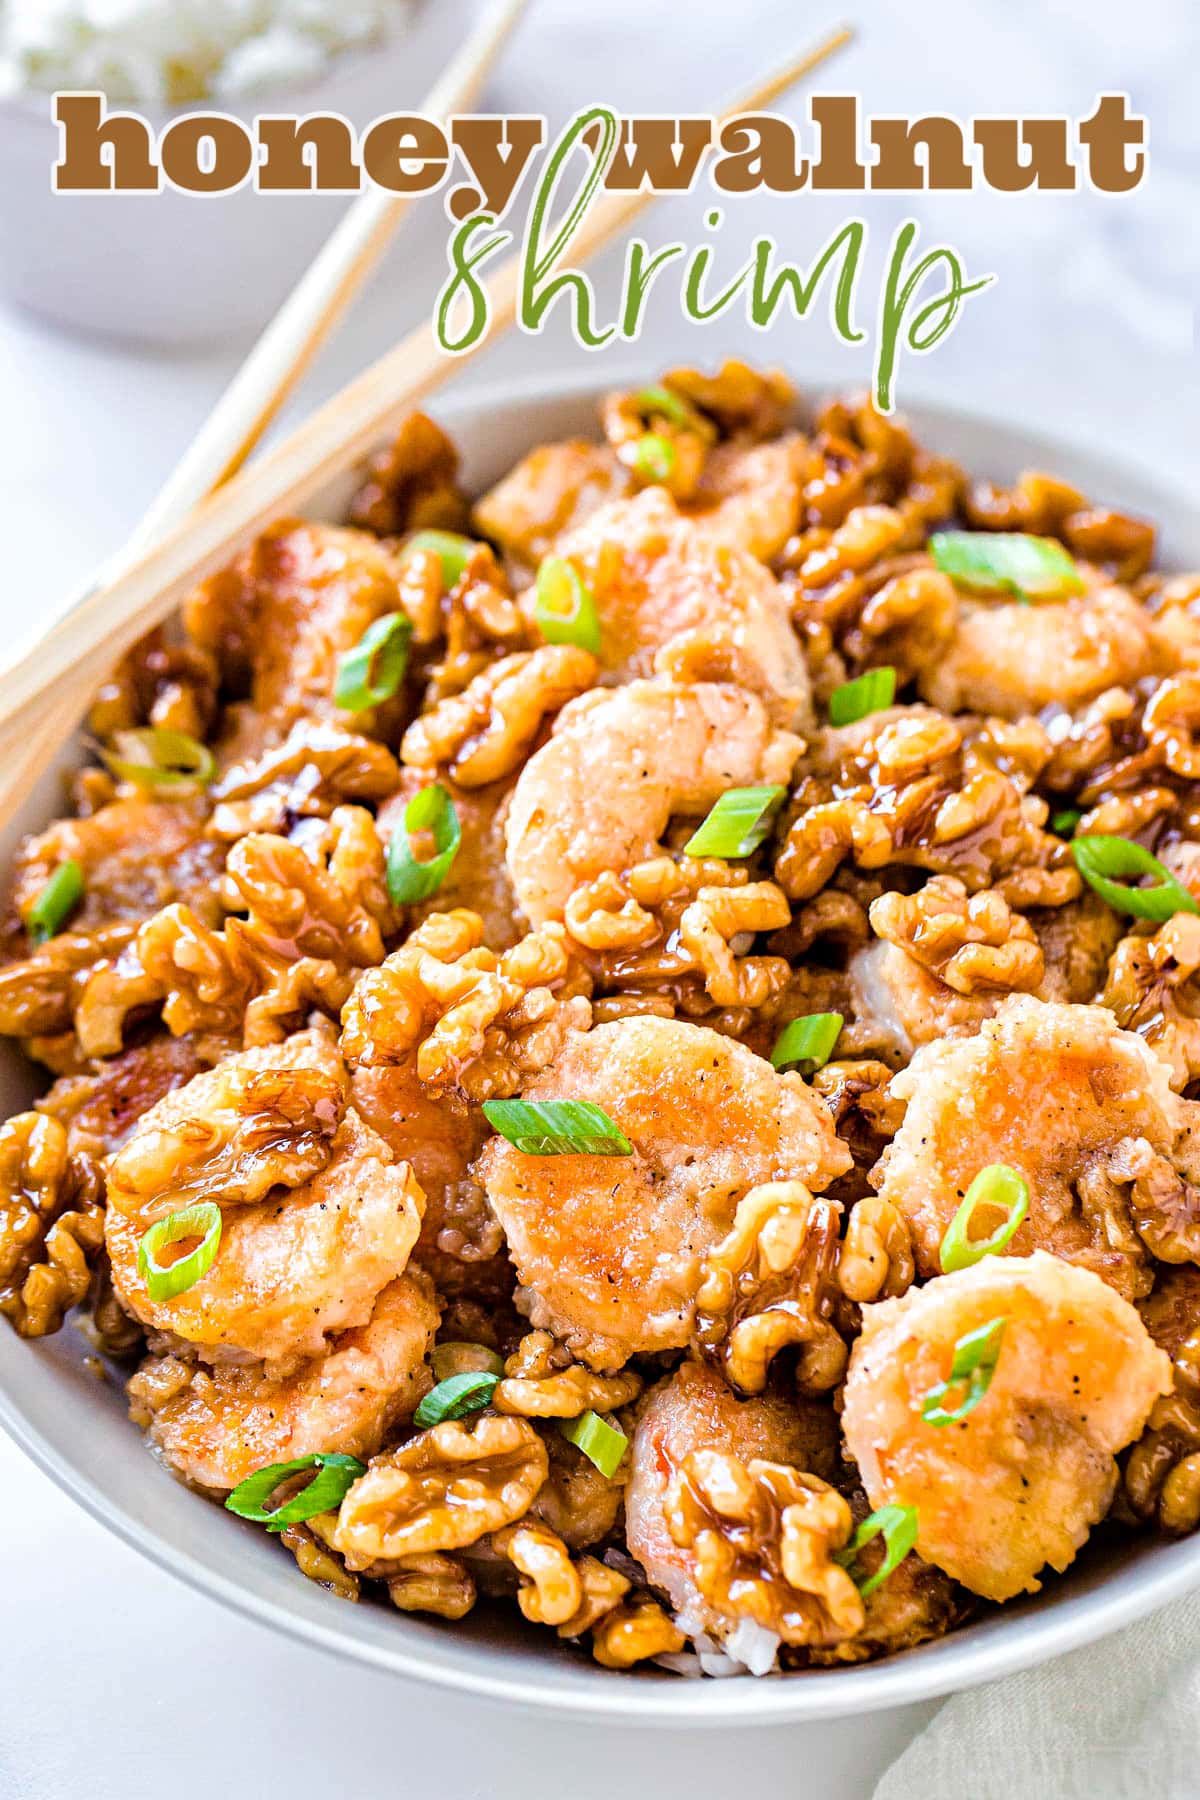 honey walnut shrimp in a white bowl garnished with green onions with chopsticks on edge of bowl and title overlay at top of image